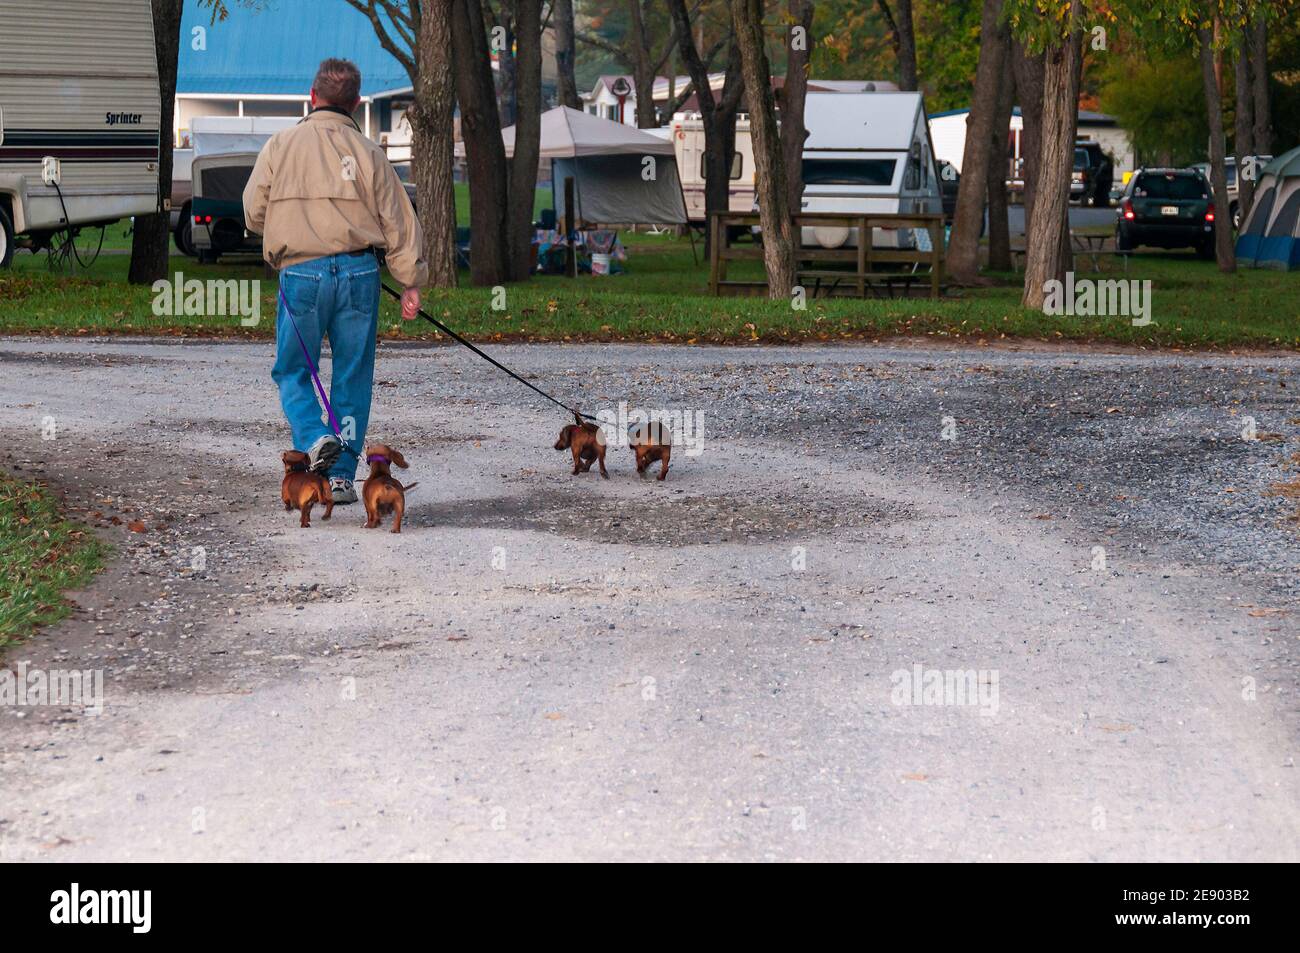 Caucasian man walking four Dachshund dogs on a gravel road in a campground. USA. Stock Photo